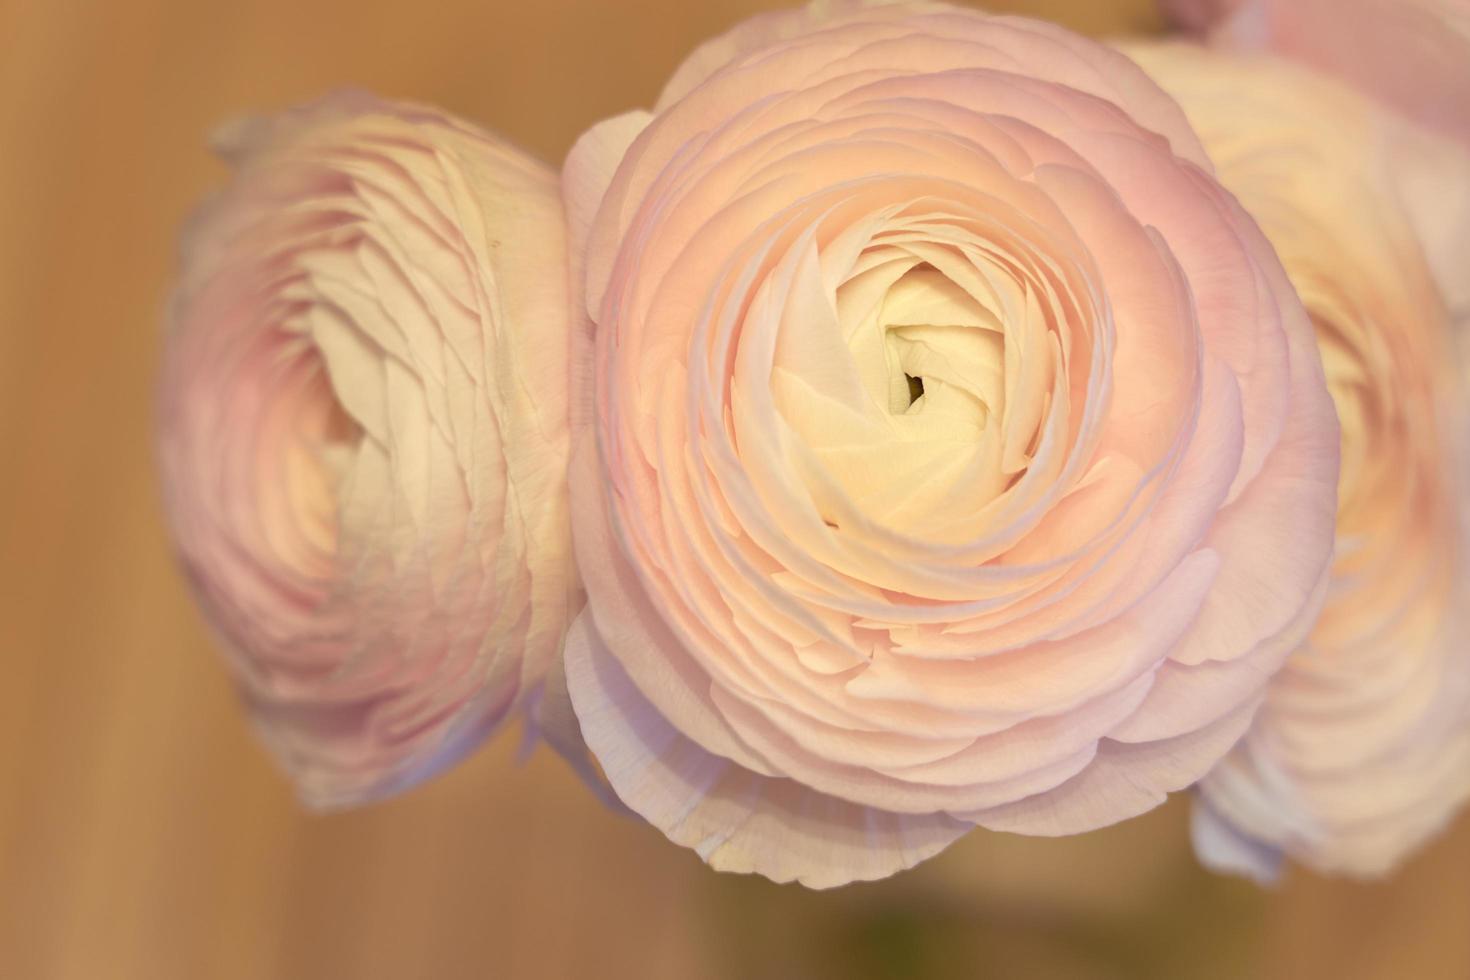 Pink Ranunculus flowers close up with a blurred background photo